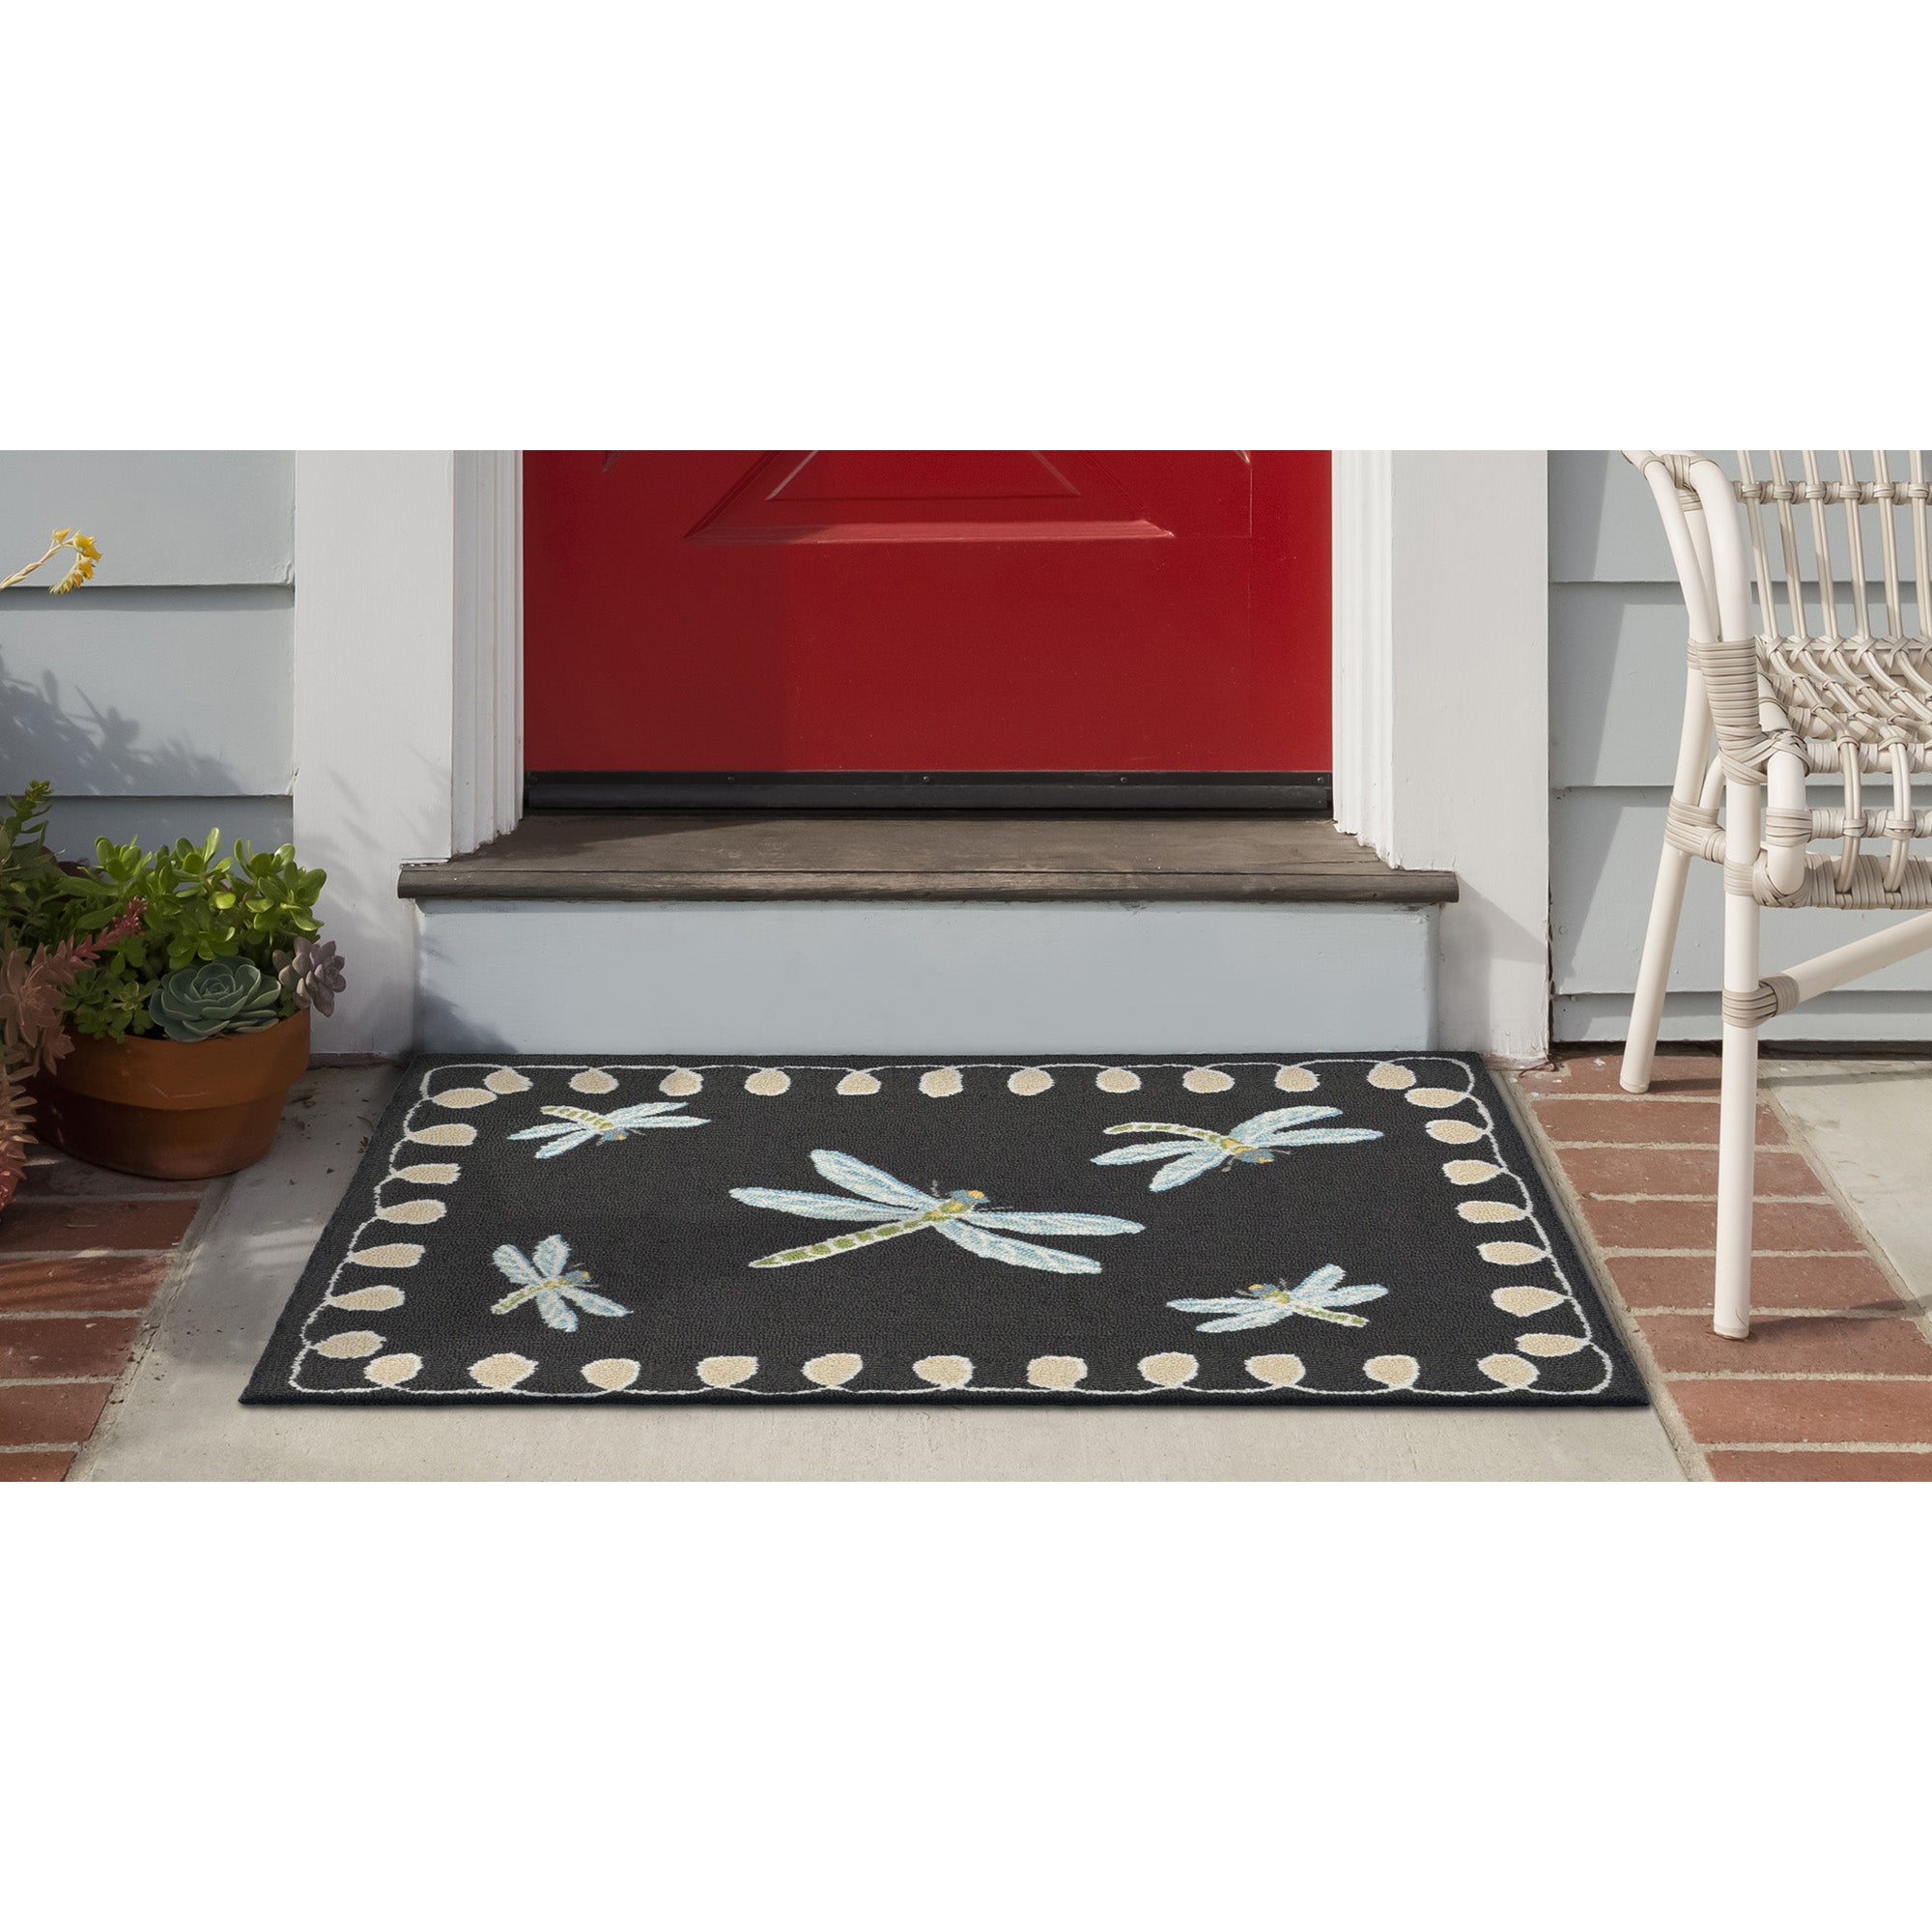 Frontporch Dragonfly Black